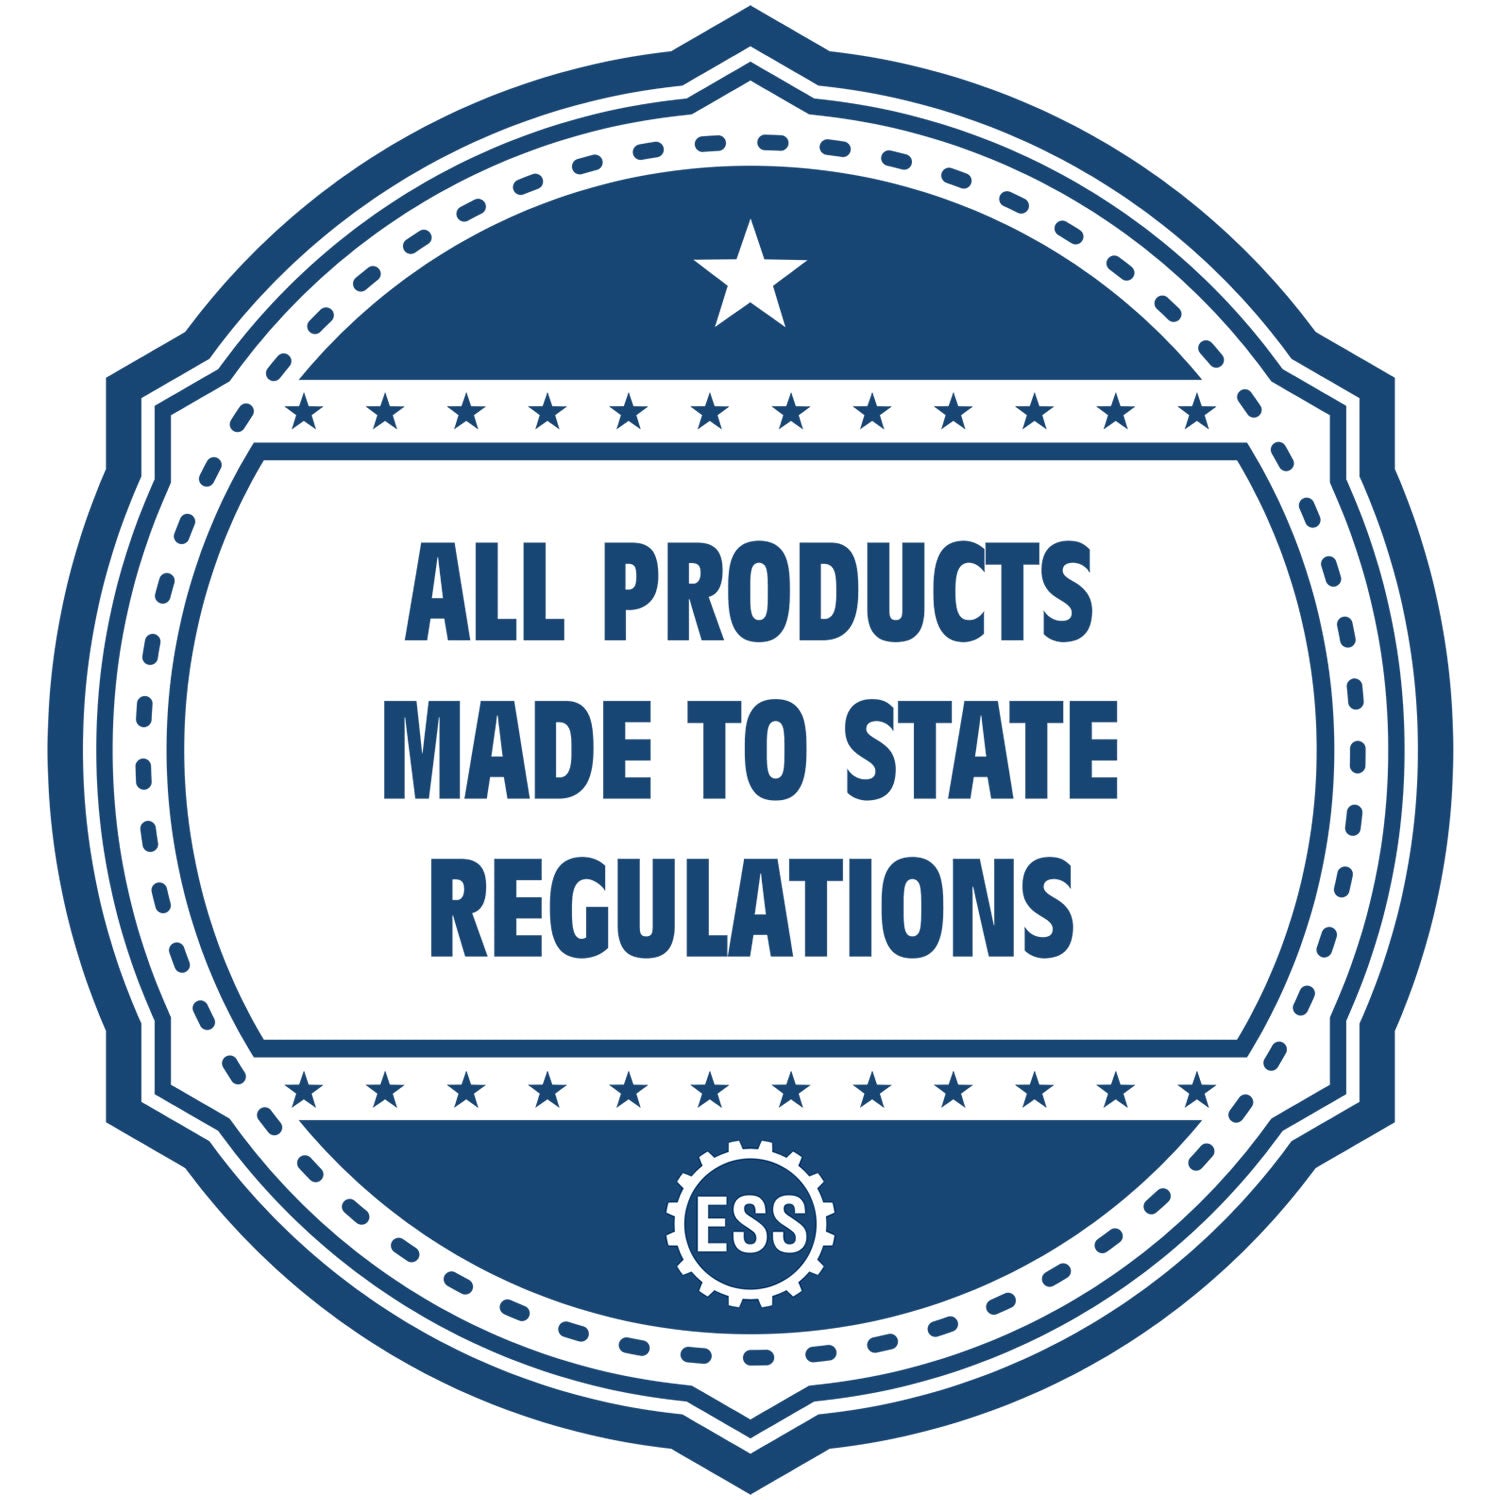 An icon or badge element for the Slim Pre-Inked State Seal Notary Stamp for Oklahoma showing that this product is made in compliance with state regulations.